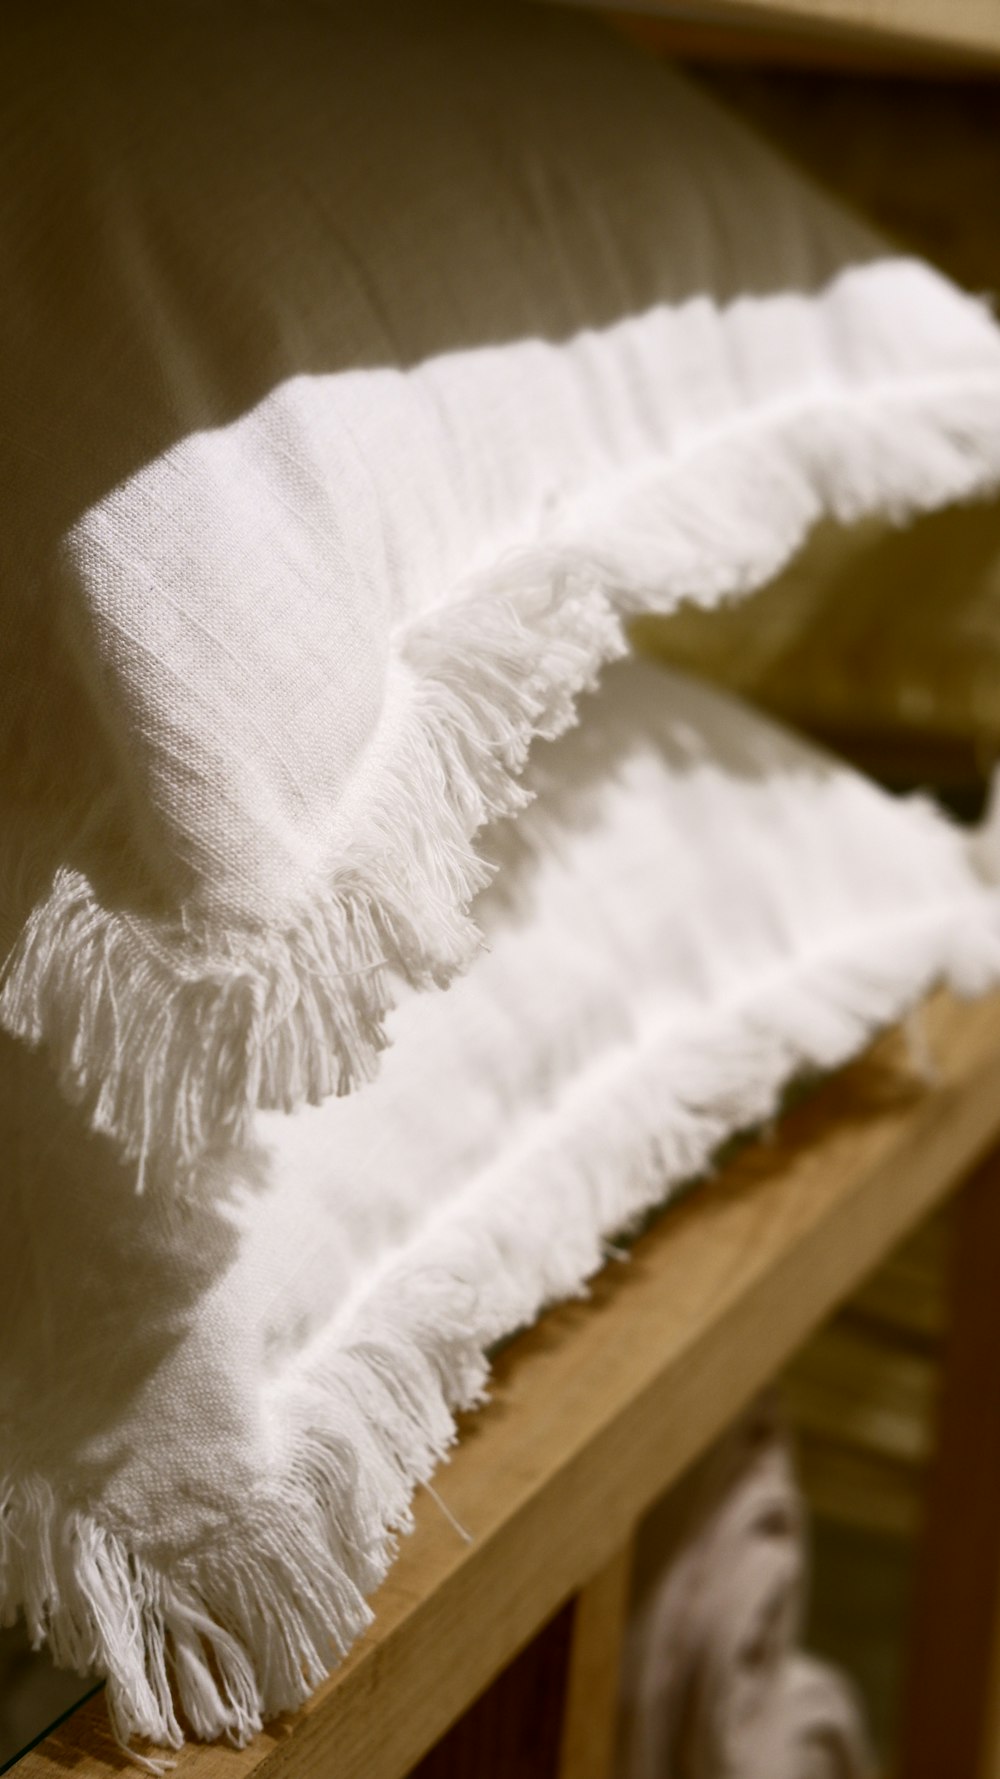 white textile on brown wooden table